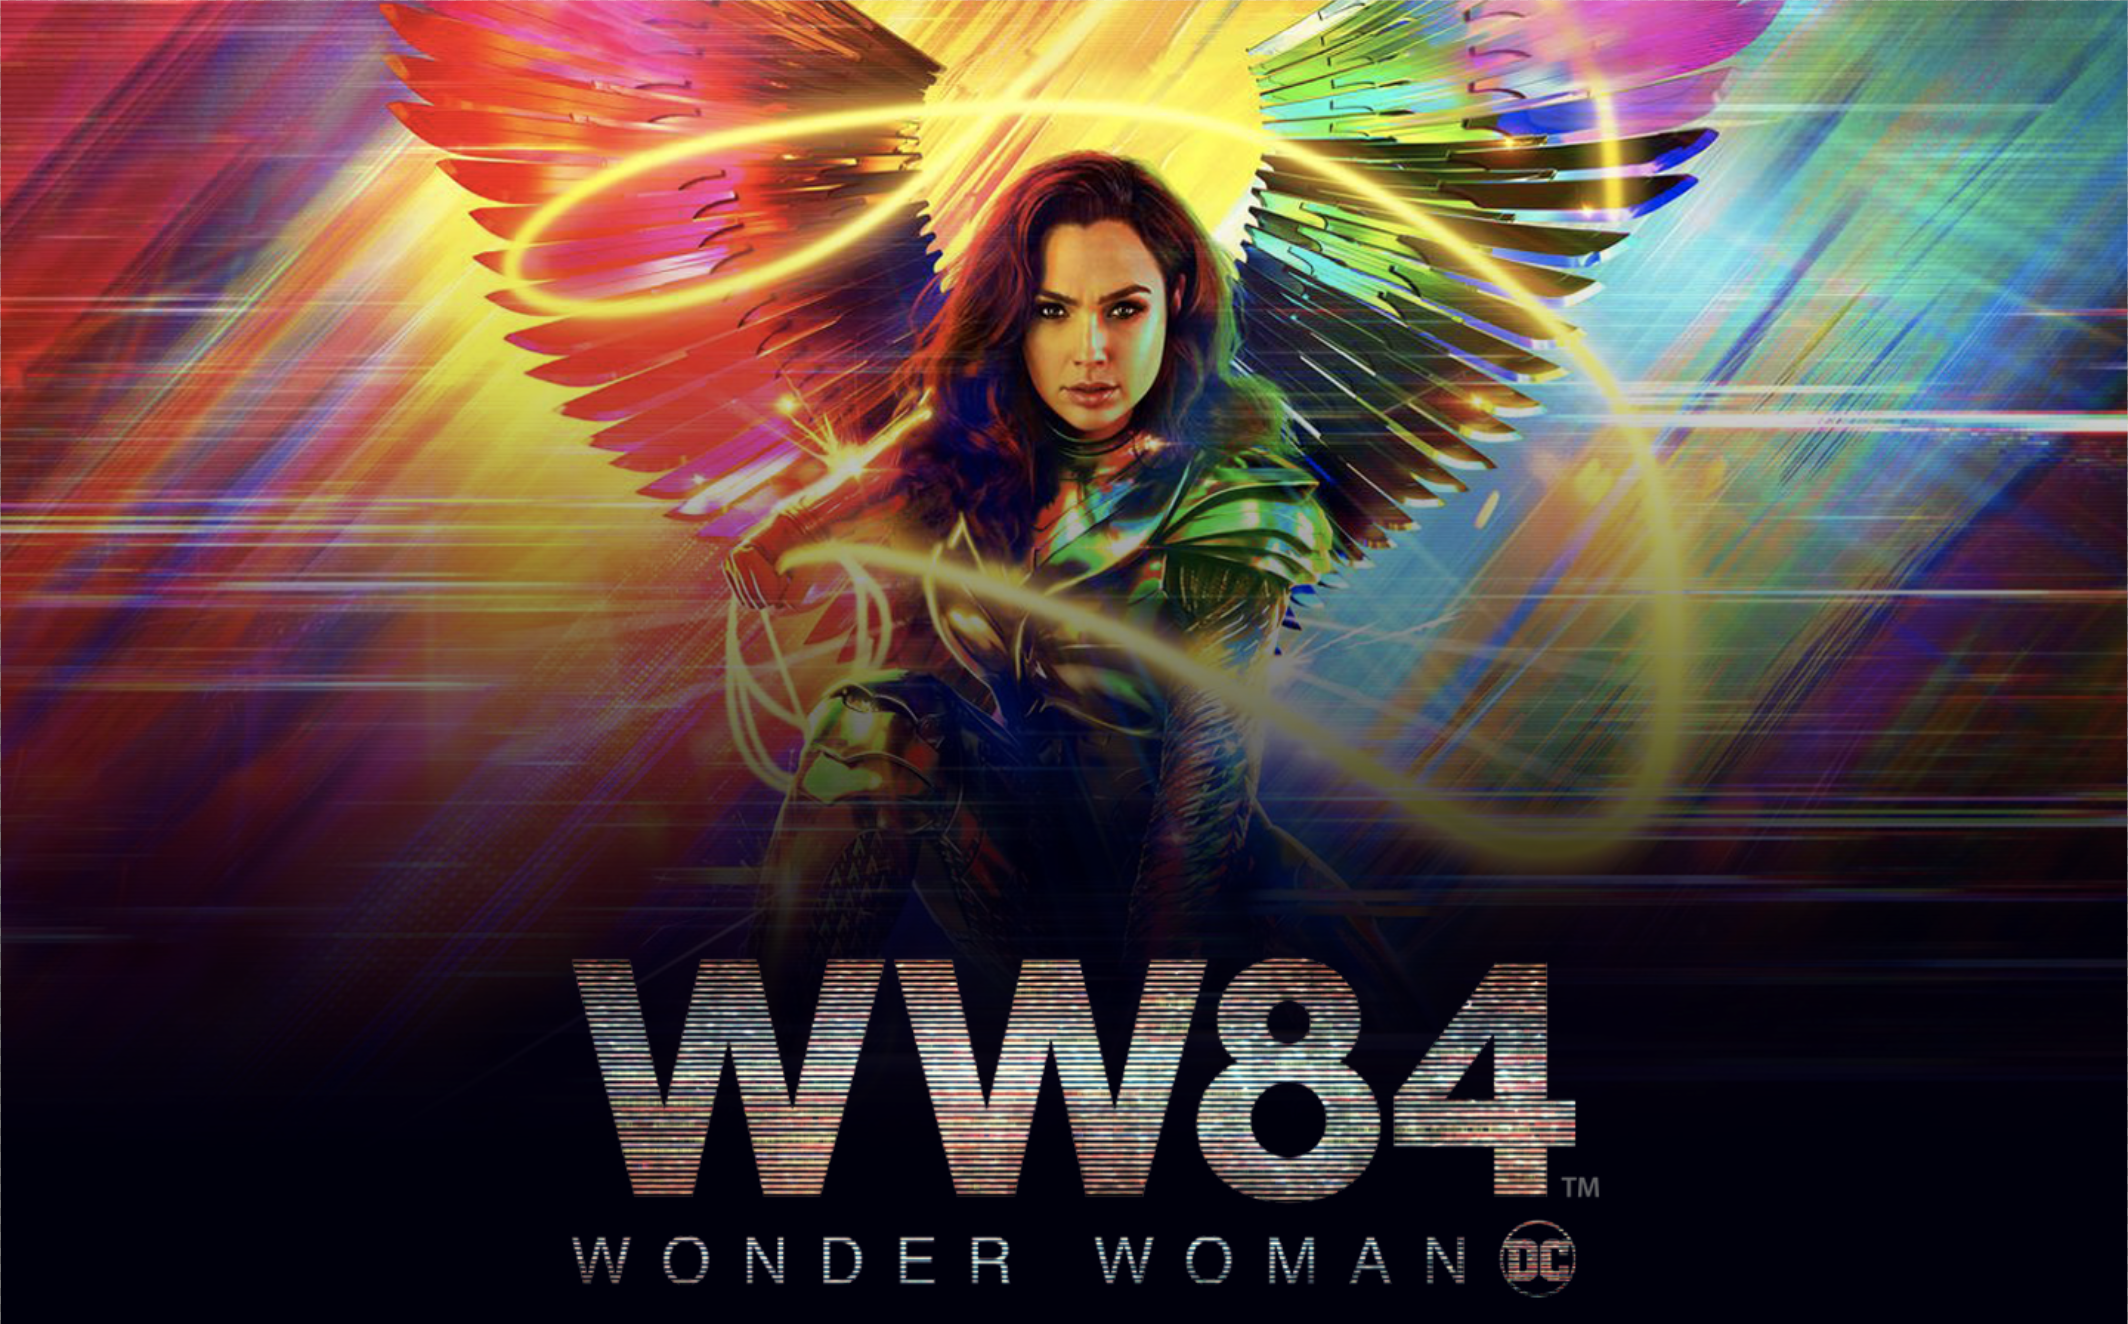 ‘Wonder Woman 1984’ Is A Story Brimming With Heart, But Not Without Its Flaws – Review